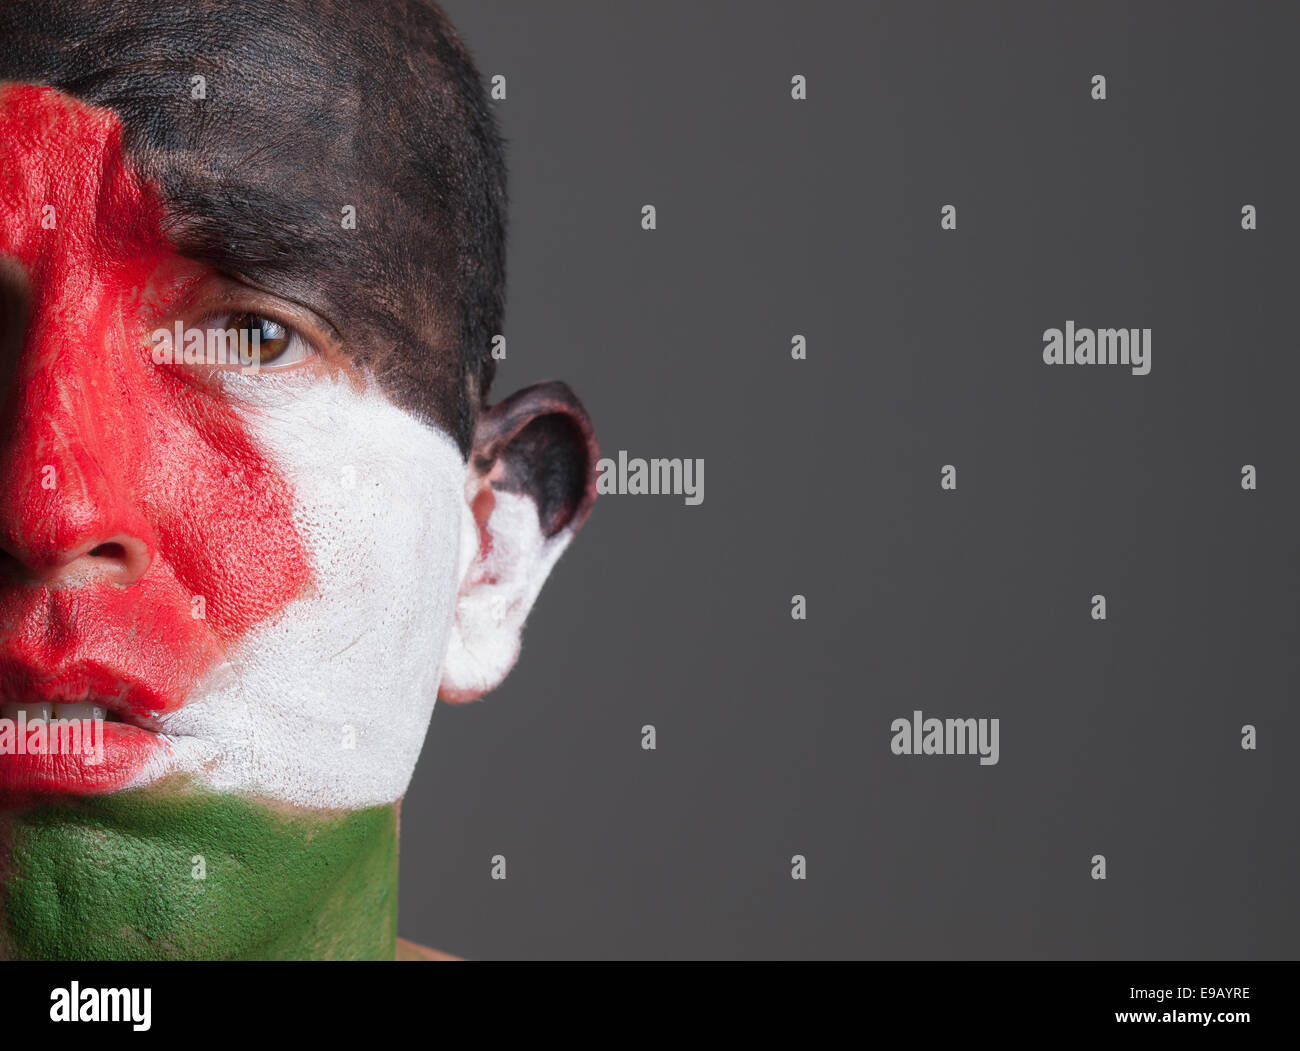 Sad man and his face painted with palestine flag. The man is isolated on dark background. Stock Photo